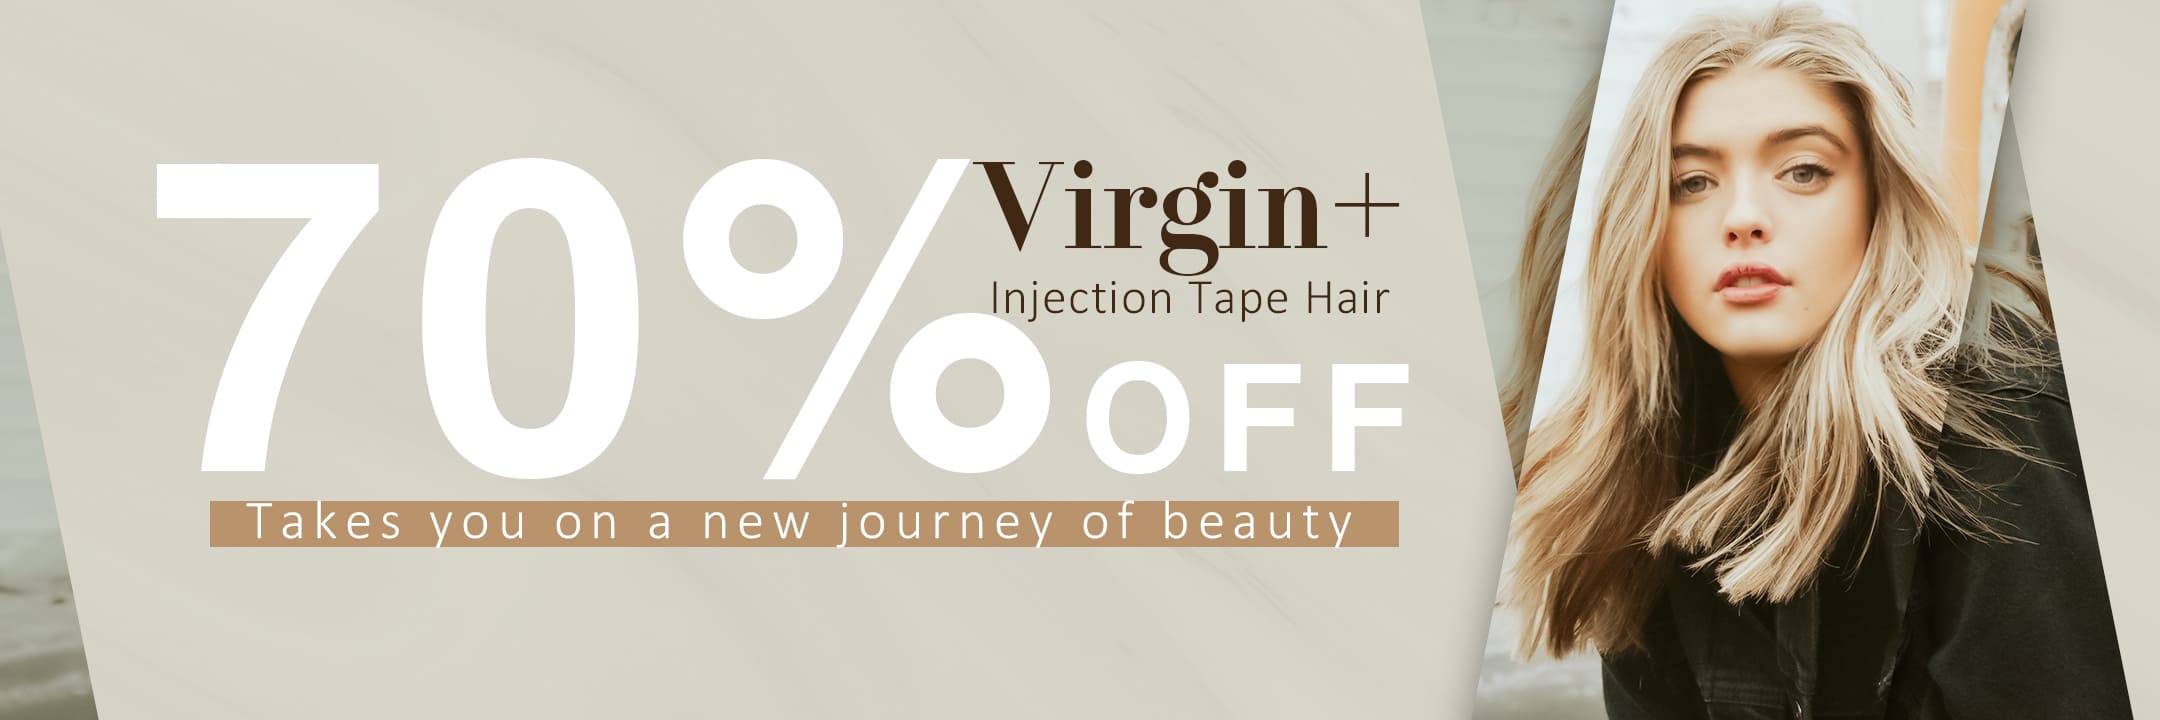 virgin+ injections tape hair extensions